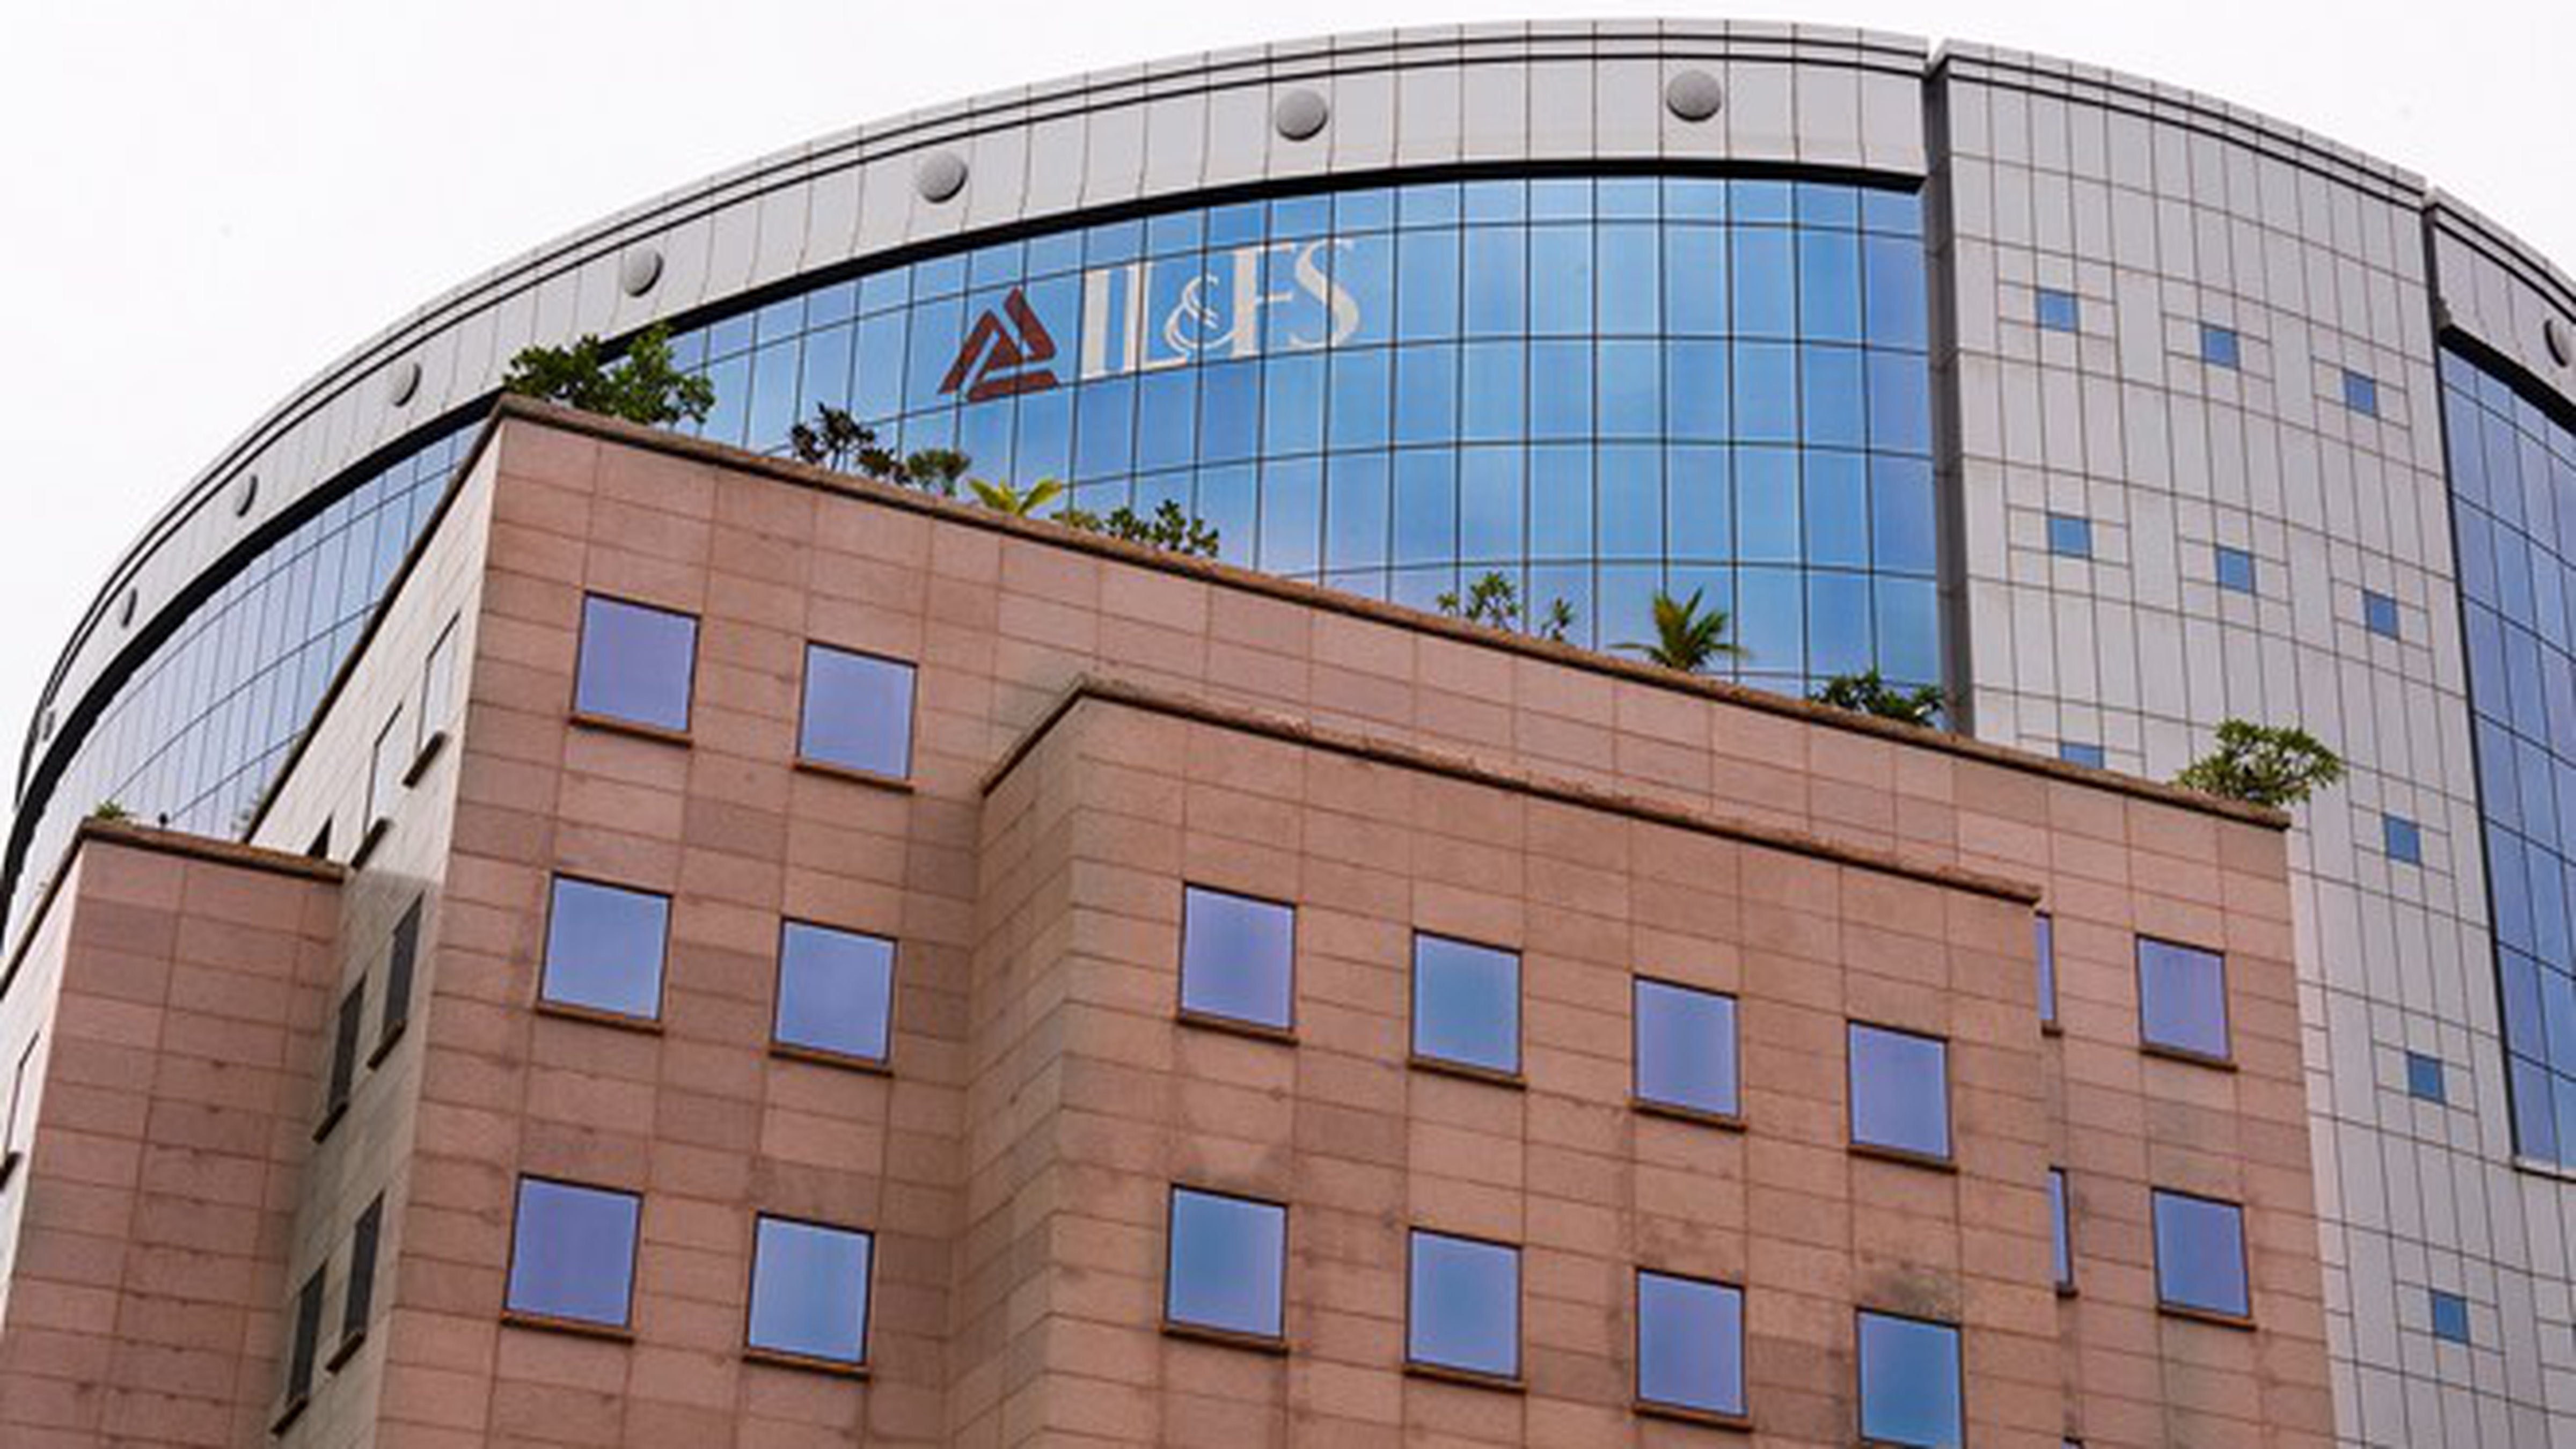 Shield for IL&FS accounts (and breather for banks)